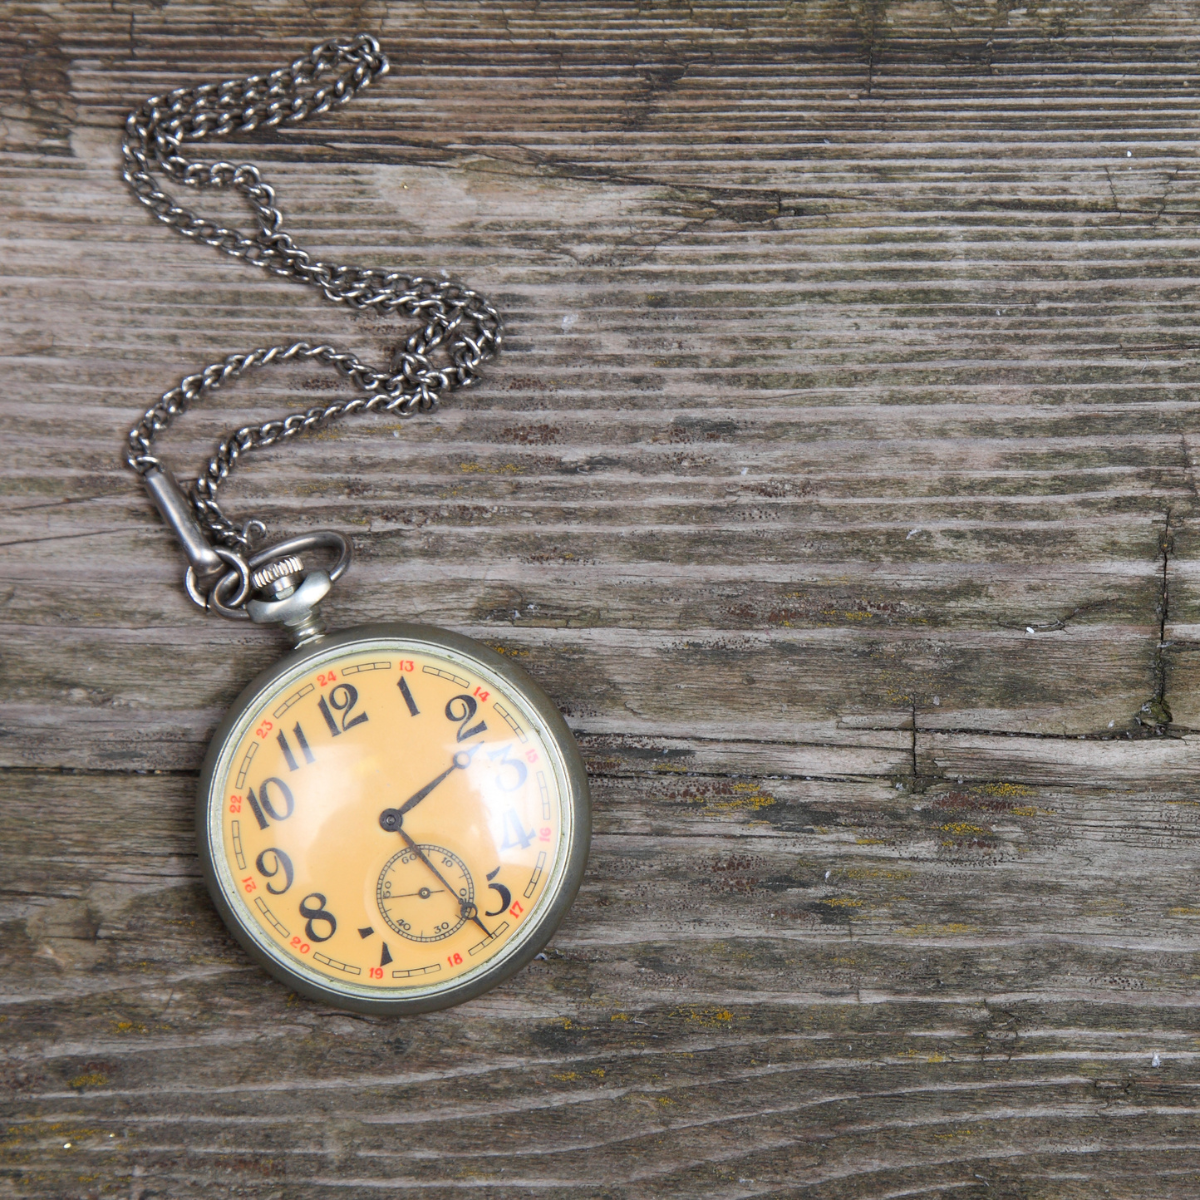 34. Timeless Love: Delight Your Wife with a Vintage Pocket Watch for Your 7th Anniversary